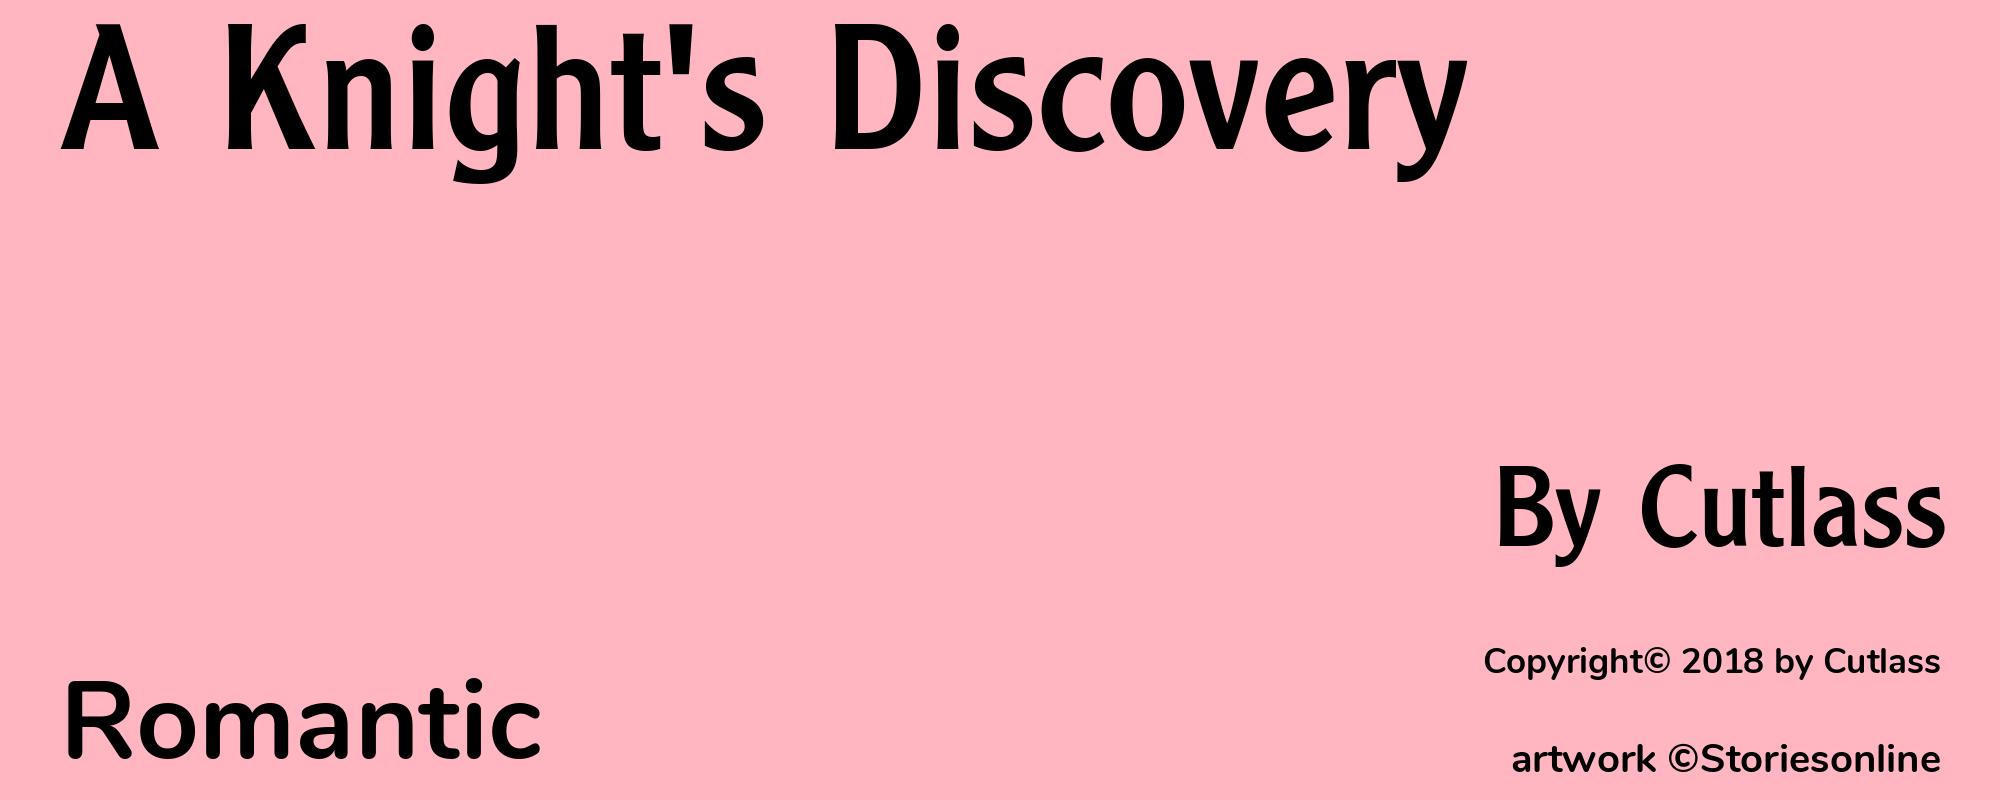 A Knight's Discovery - Cover